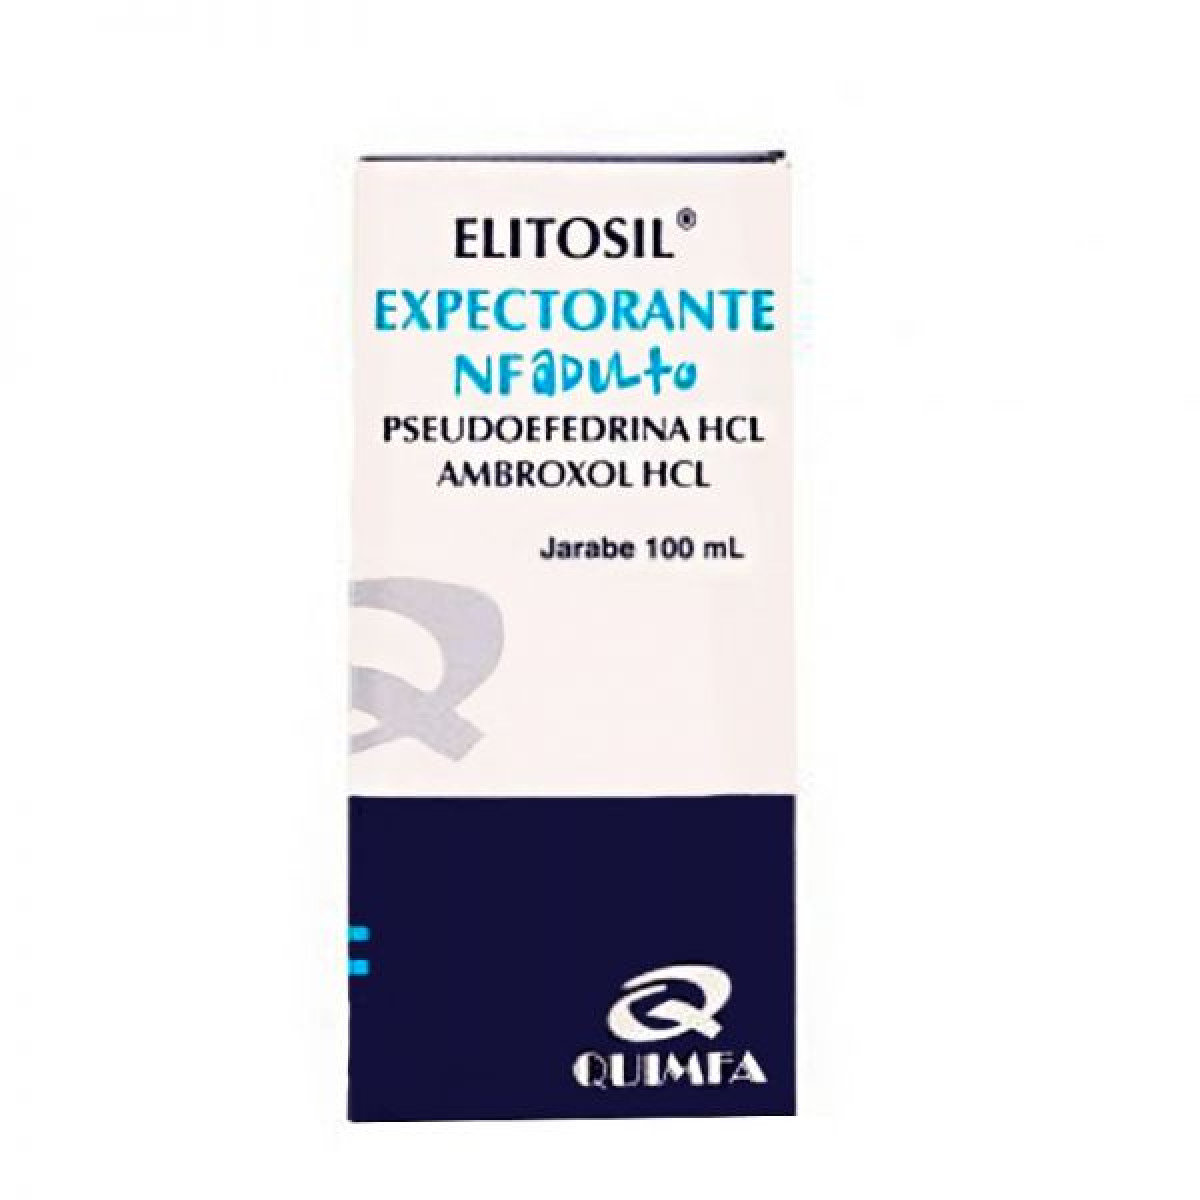 ELITOSIL EXPECT NF ADULT JBE 100 ML